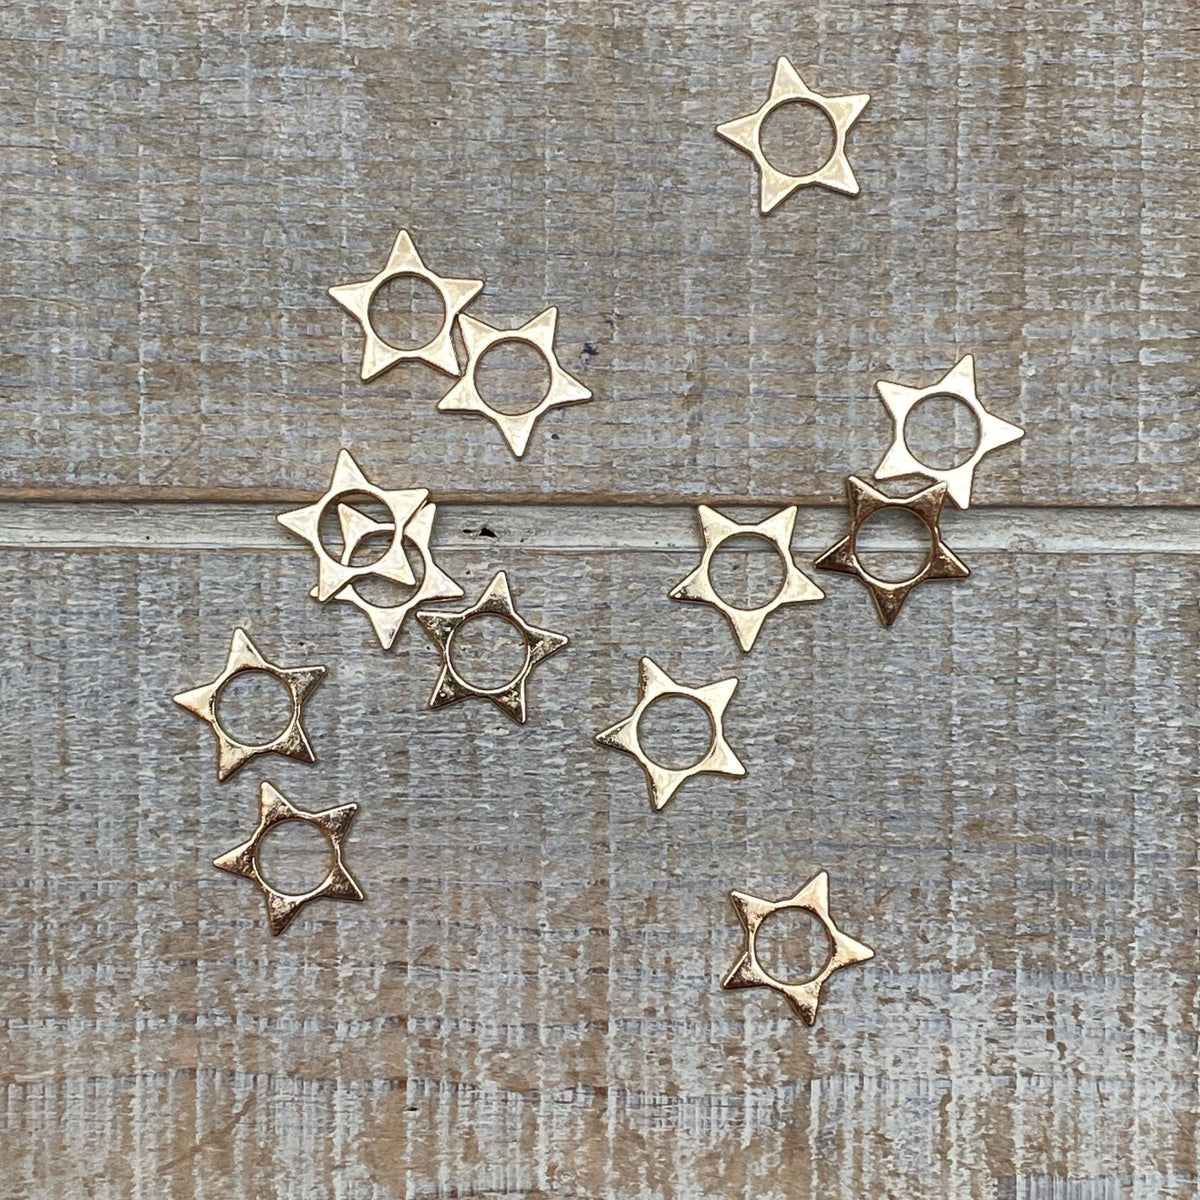 Large Star Stitch Markers for Knitting Needles - Set of 28 Seamless Rings